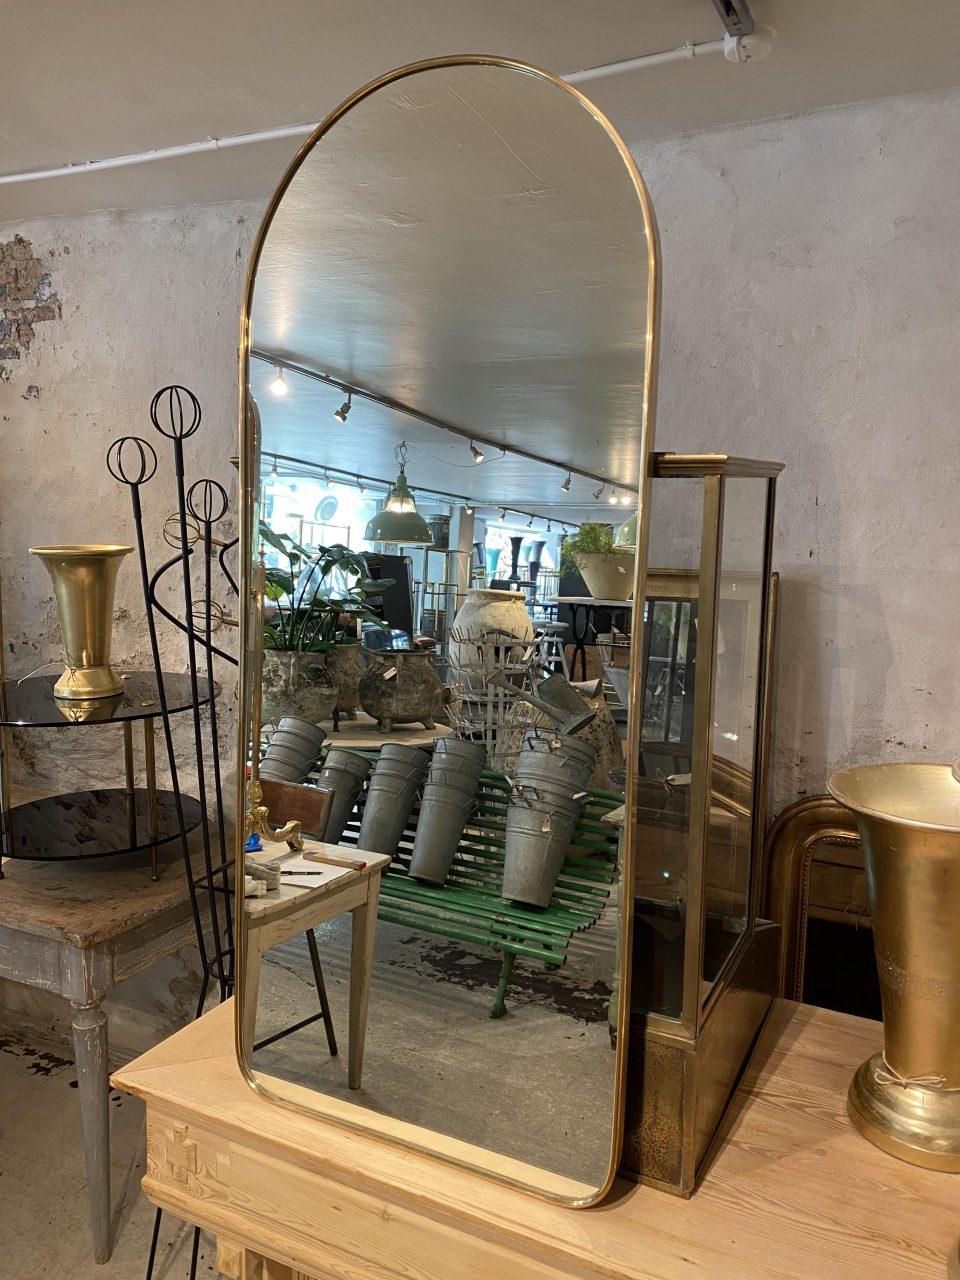 Stylish and sought after midcentury Italian brass mirror, in a beautiful archway design. Original mirrored glass, and stylistically related to the well-known designer Giò Ponti. There are suspension brackets mounted on the back.

Notice the